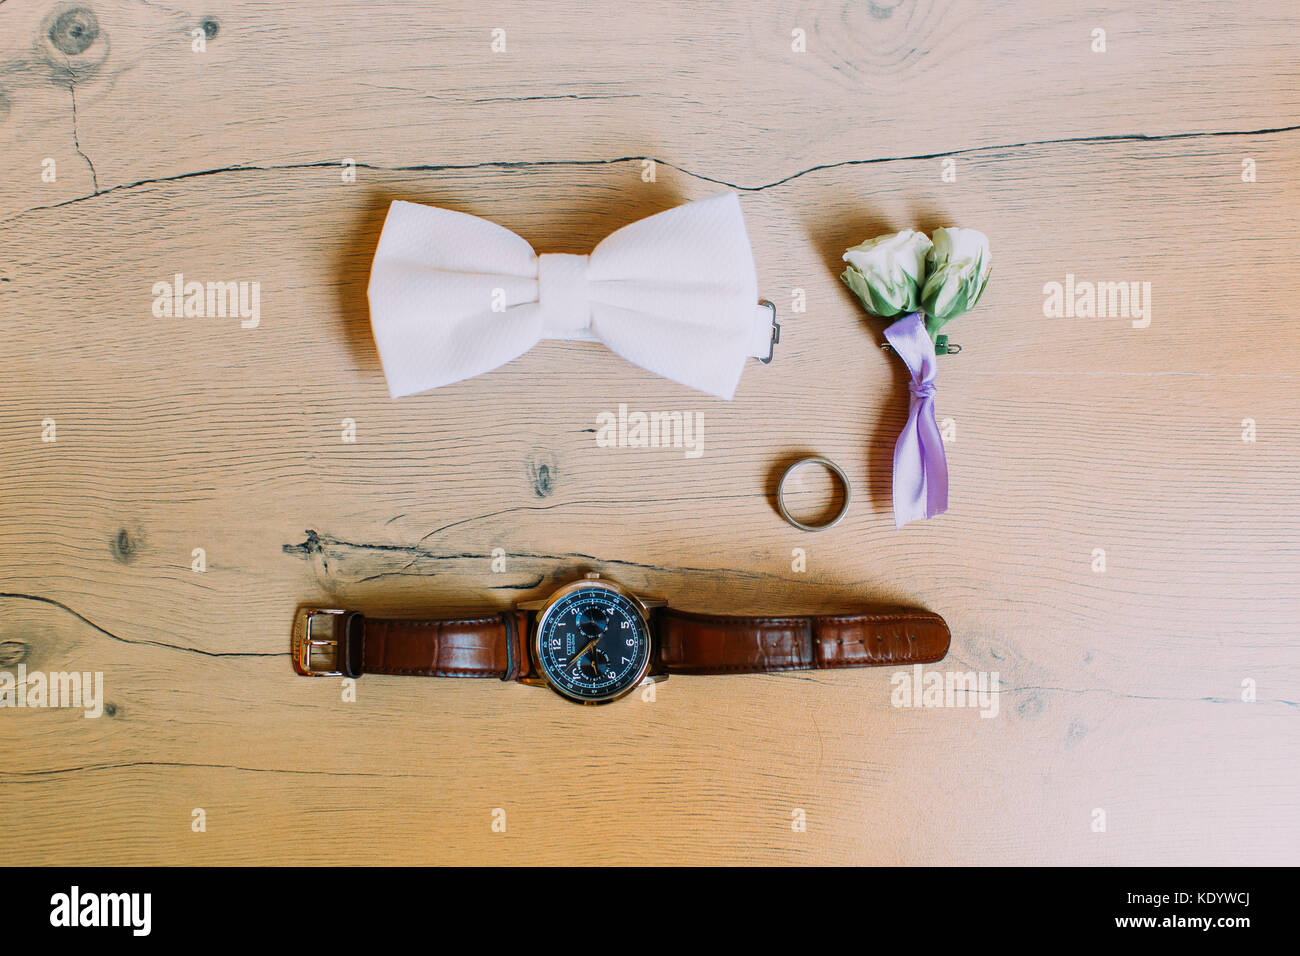 The wedding accessories. The lovely rose boutonniere, hand watch, silver ring and bow-tie on the rustic floor. Stock Photo